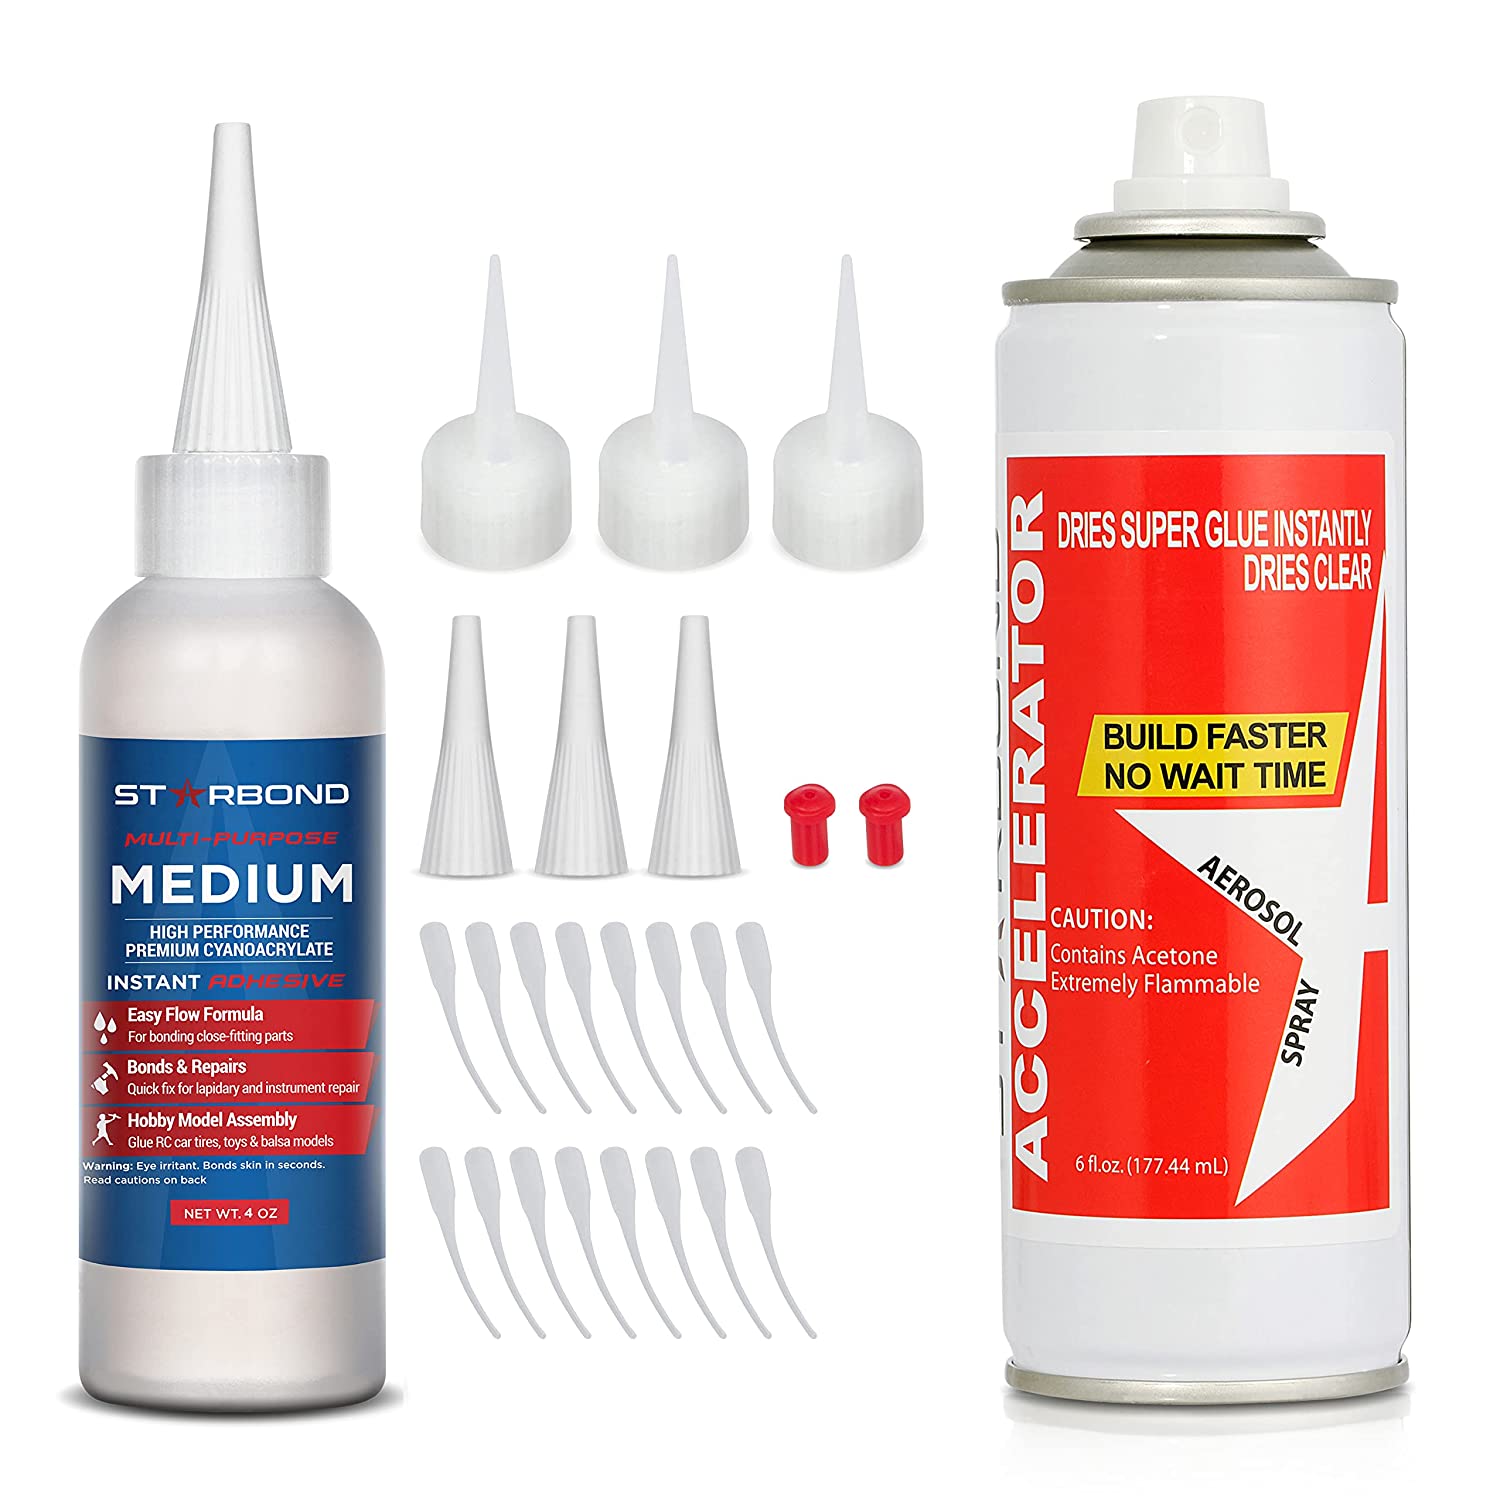 Starbond Adhesives - 𝗦𝘁𝗮𝗿𝗯𝗼𝗻𝗱 𝗕𝗹𝗮𝗰𝗸 𝗠𝗲𝗱𝗶𝘂𝗺-𝗧𝗵𝗶𝗰𝗸 𝗖𝗔  𝗚𝗹𝘂𝗲 is a flexible, rubber-strengthened super glue that dries jet black.  This amazing adhesive has impact and shock-absorbing pr